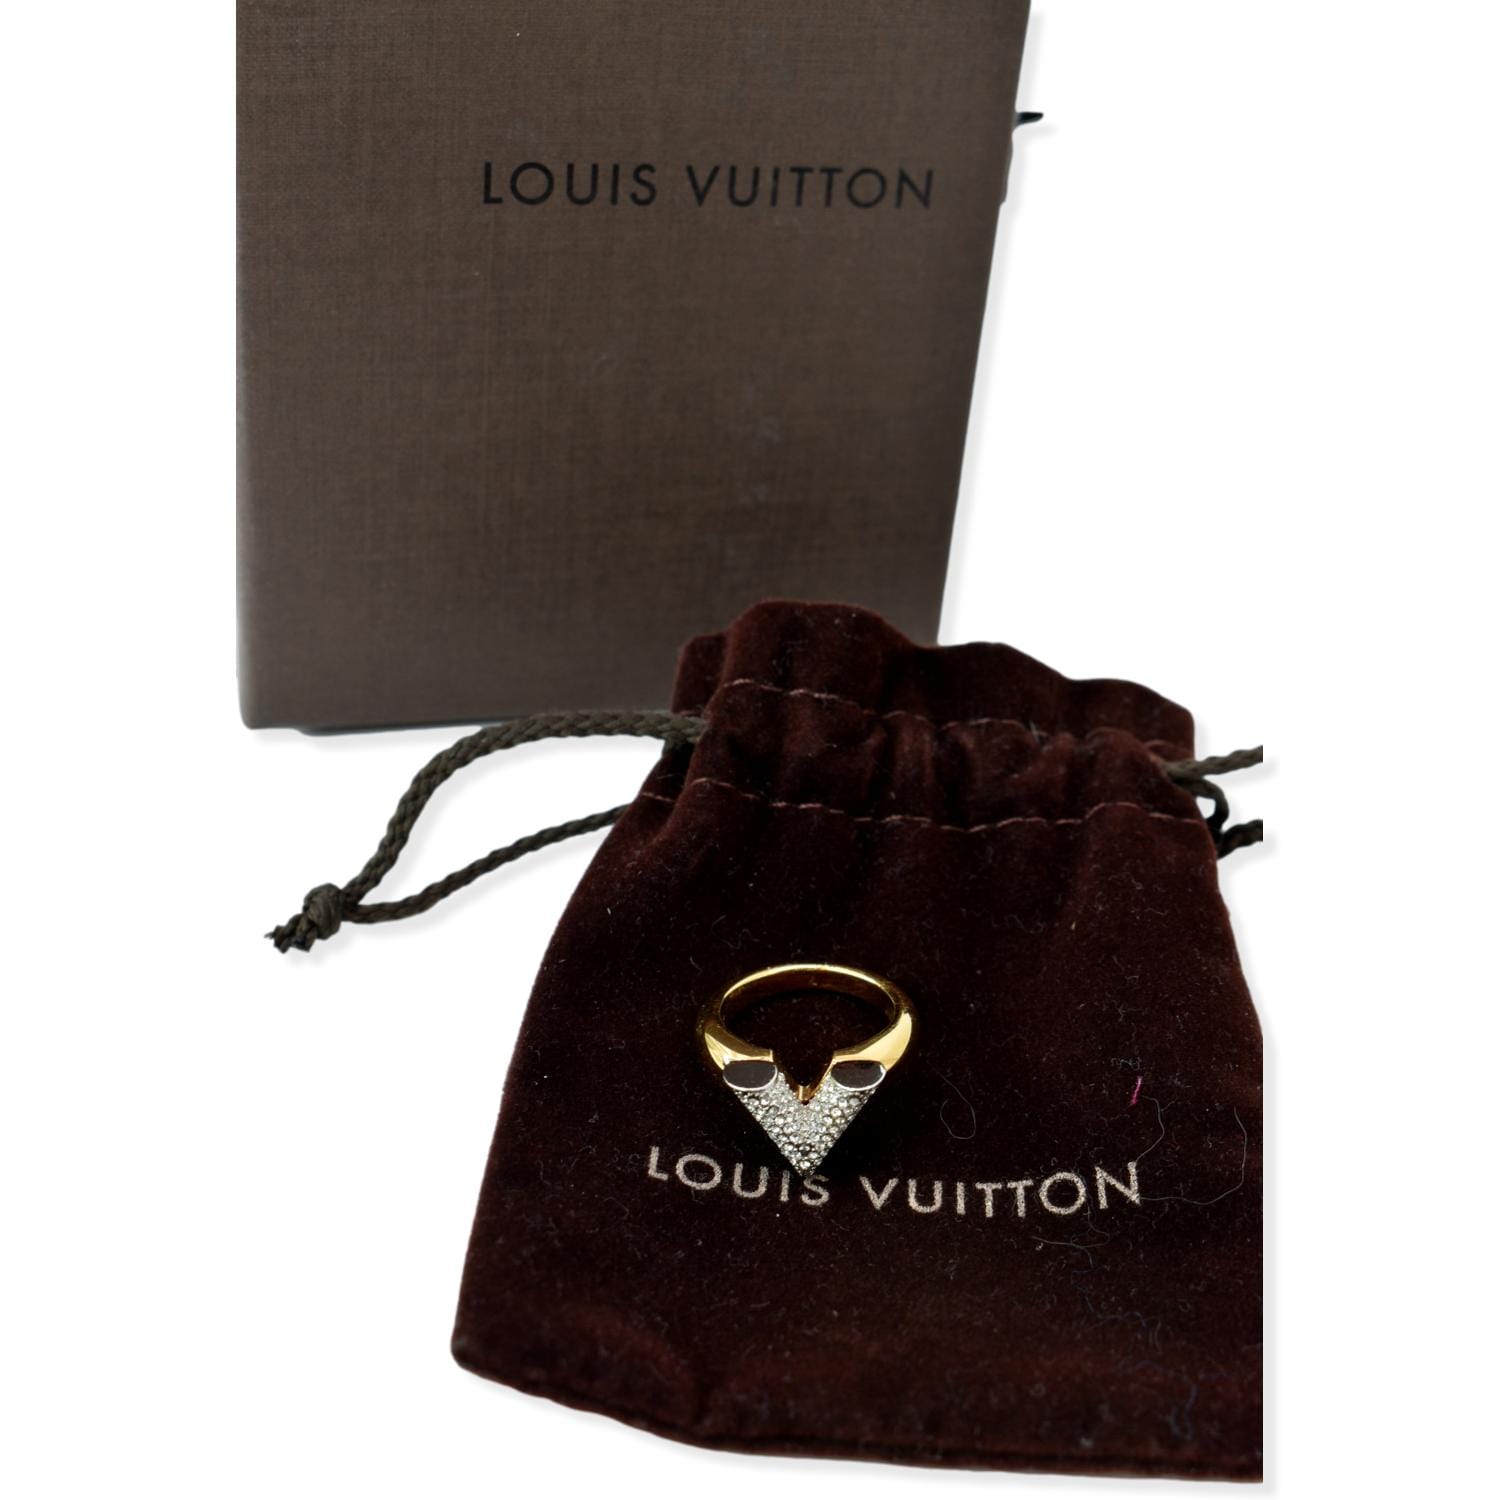 Products By Louis Vuitton: Essentials